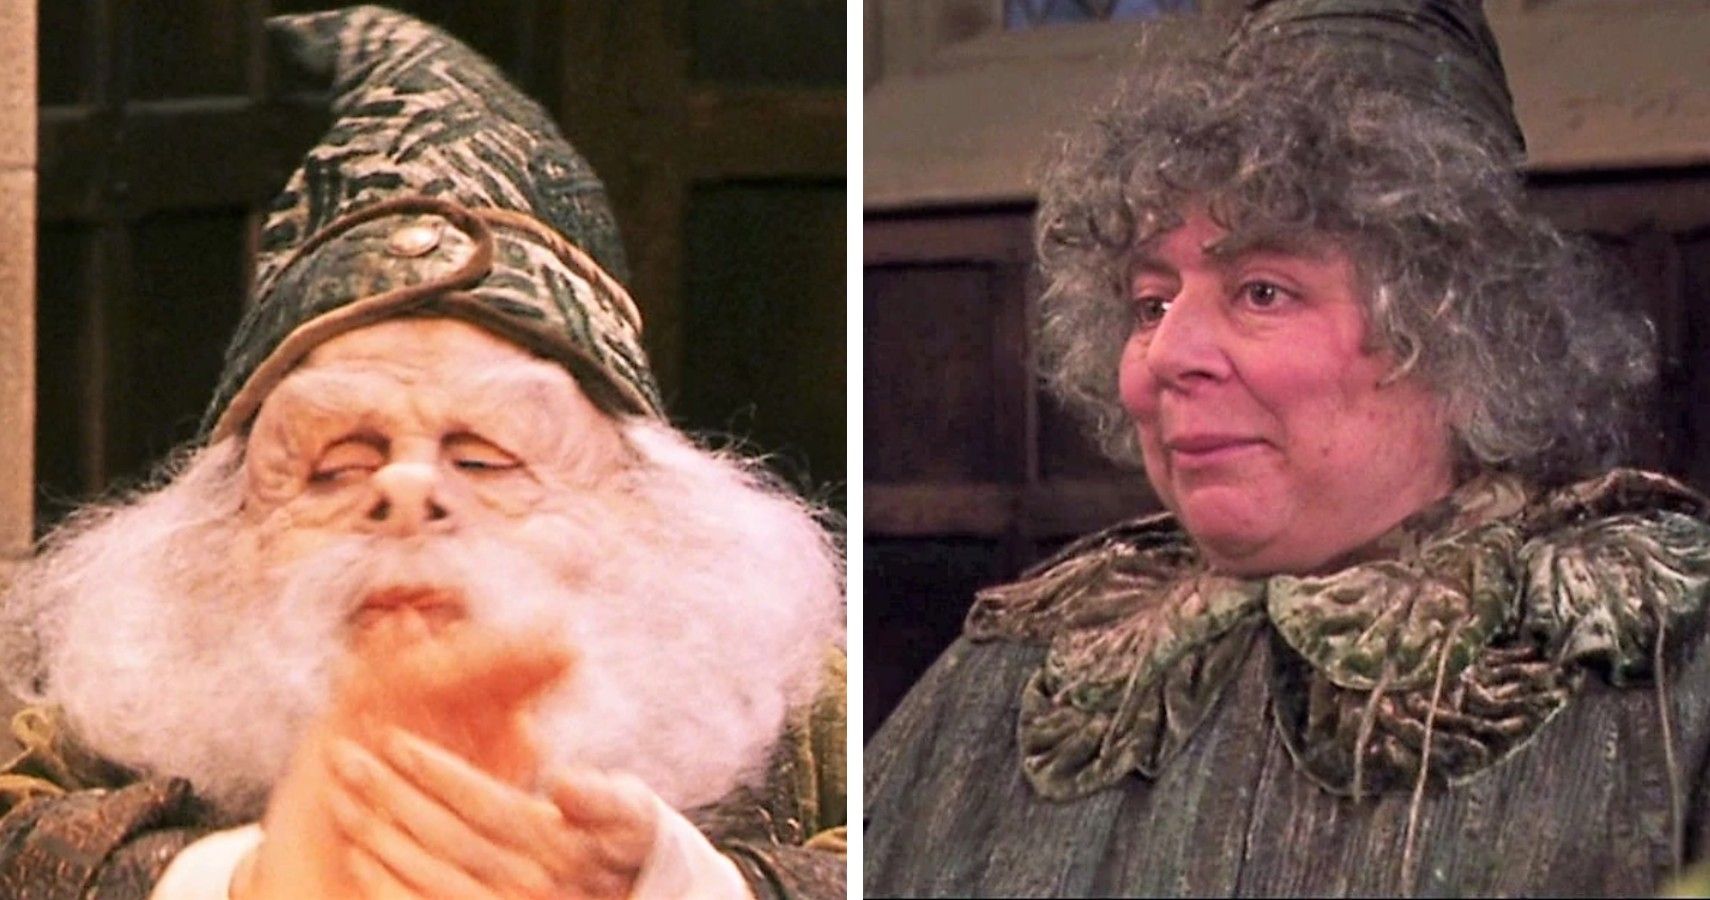 Harry Potter 5 Reasons Professor Flitwick Was The Most Underrated Teacher (& 5 Reasons It Was Professor Sprout)